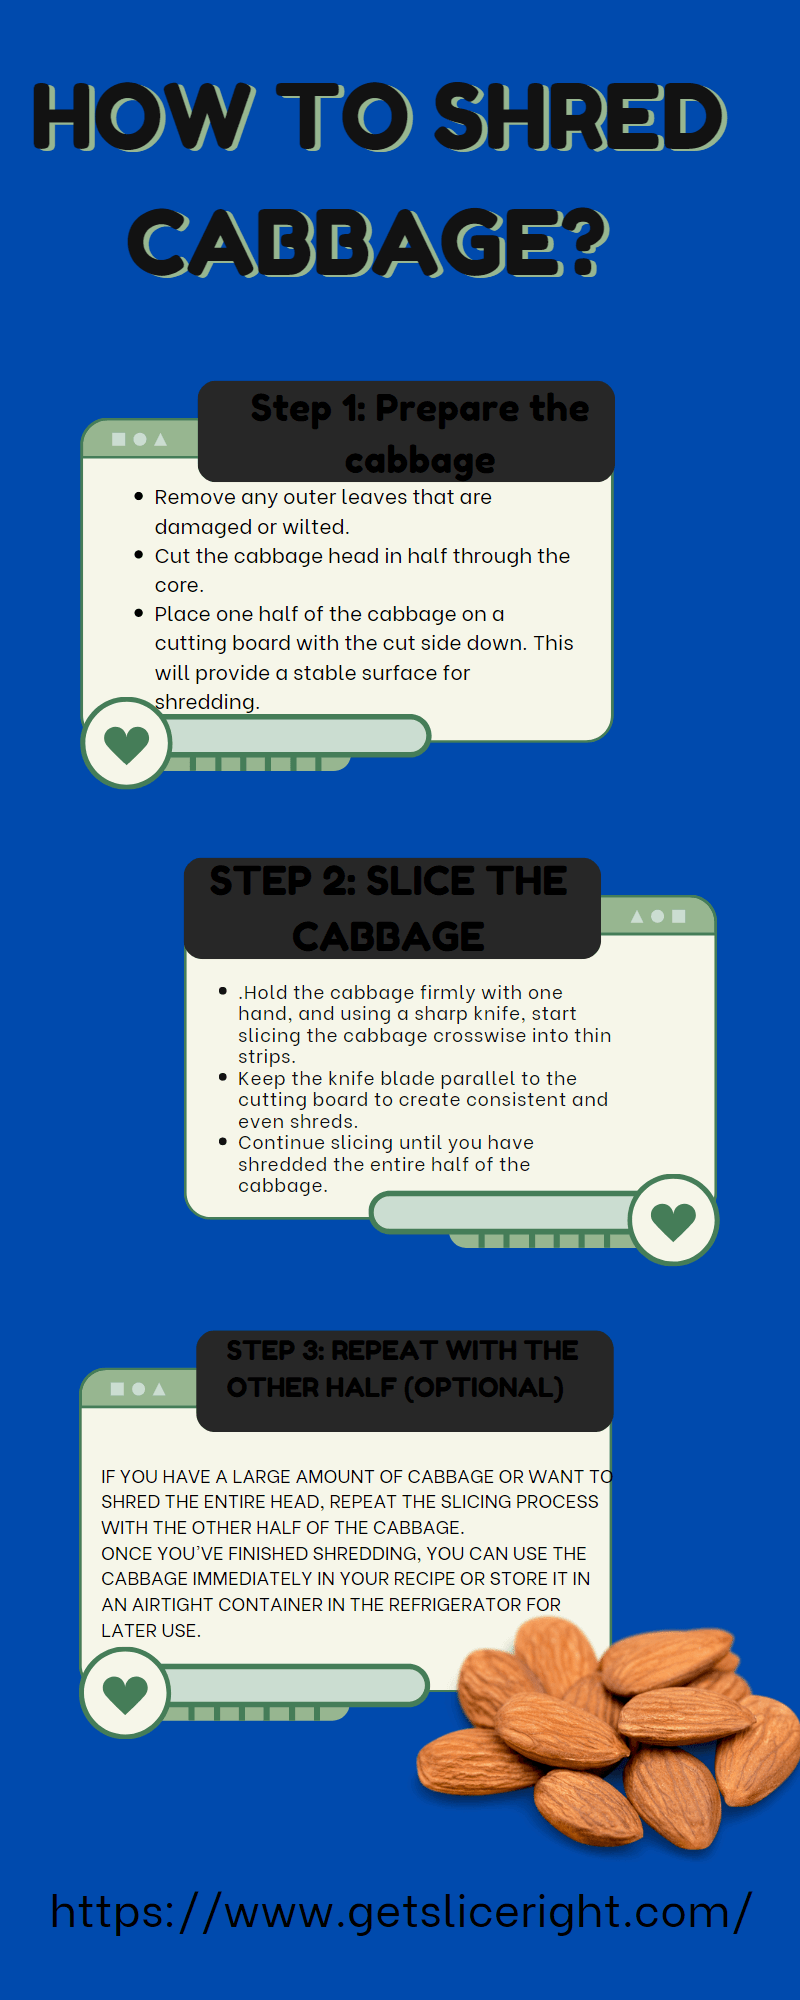 How to shred cabbage - Getsliceright Infographic